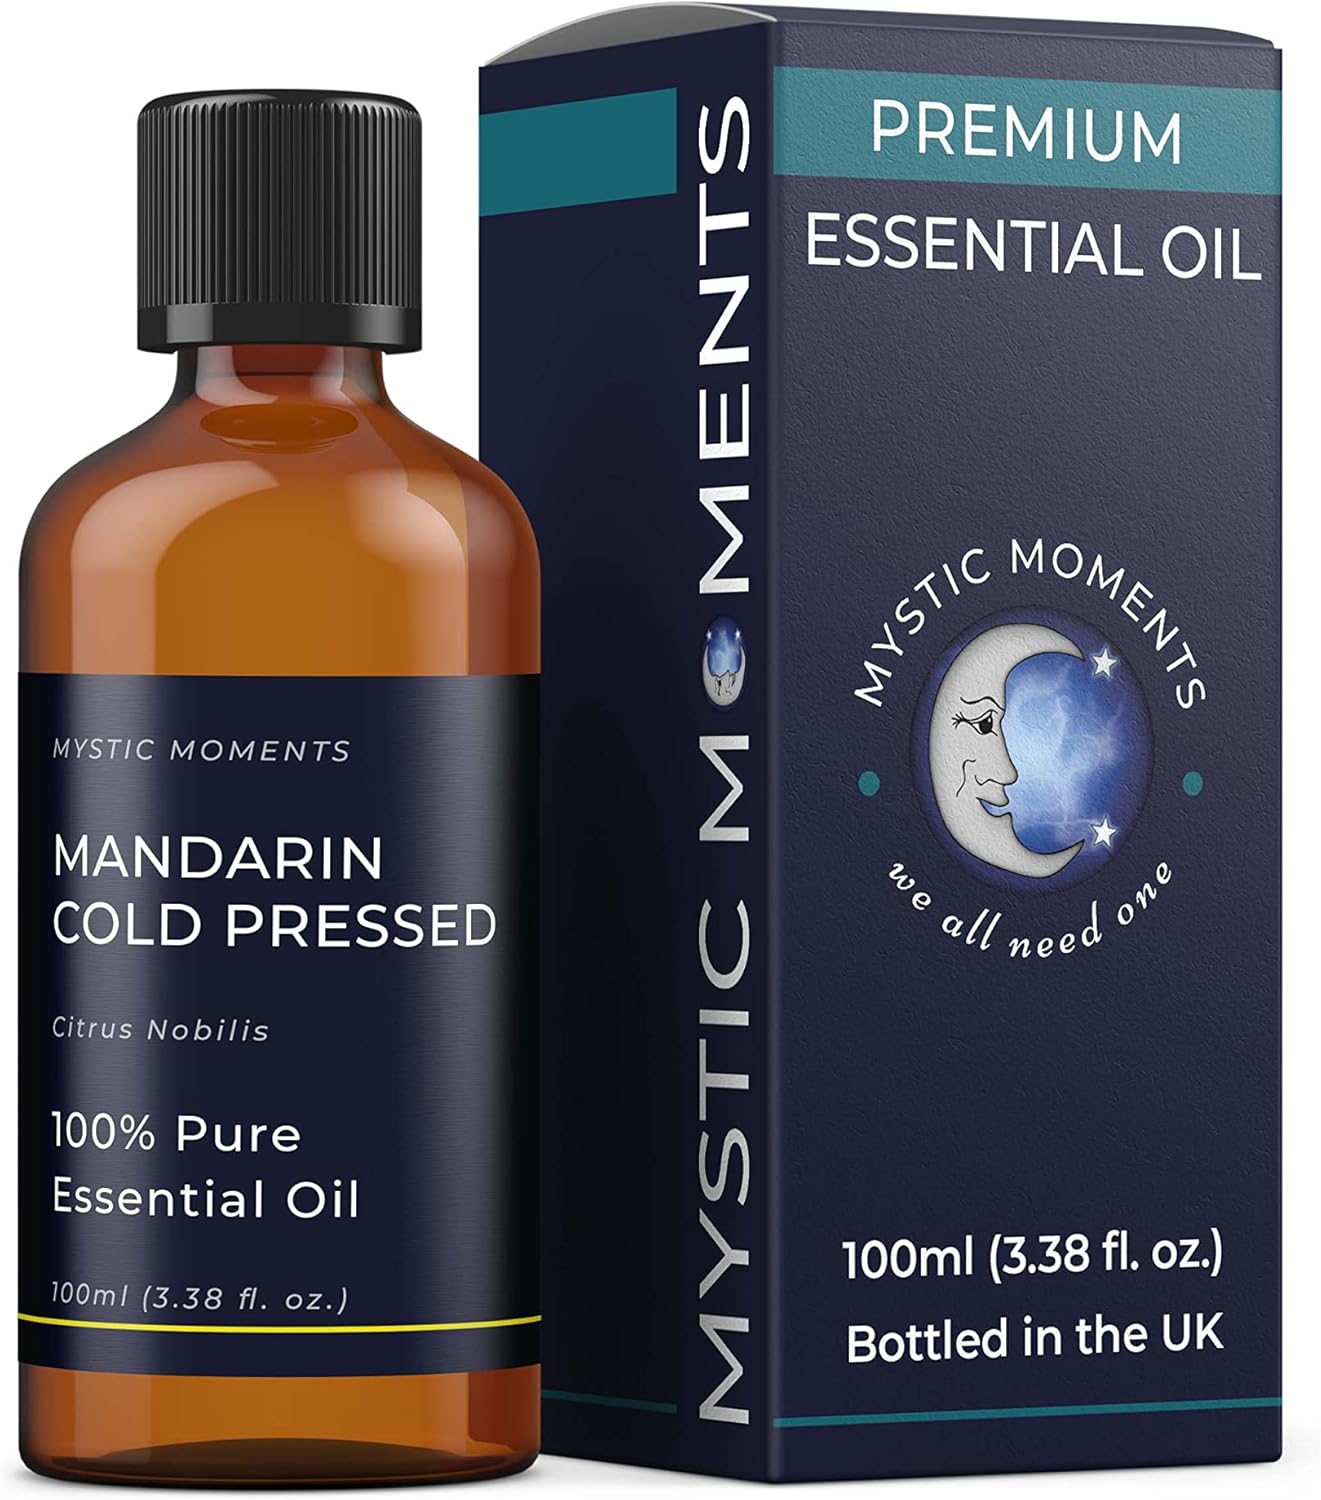 Mystic Moments | Mandarin Cold Pressed Essential Oil 100ml - Pure & Natural oil for Diffusers, Aromatherapy & Massage Blends Vegan GMO Free